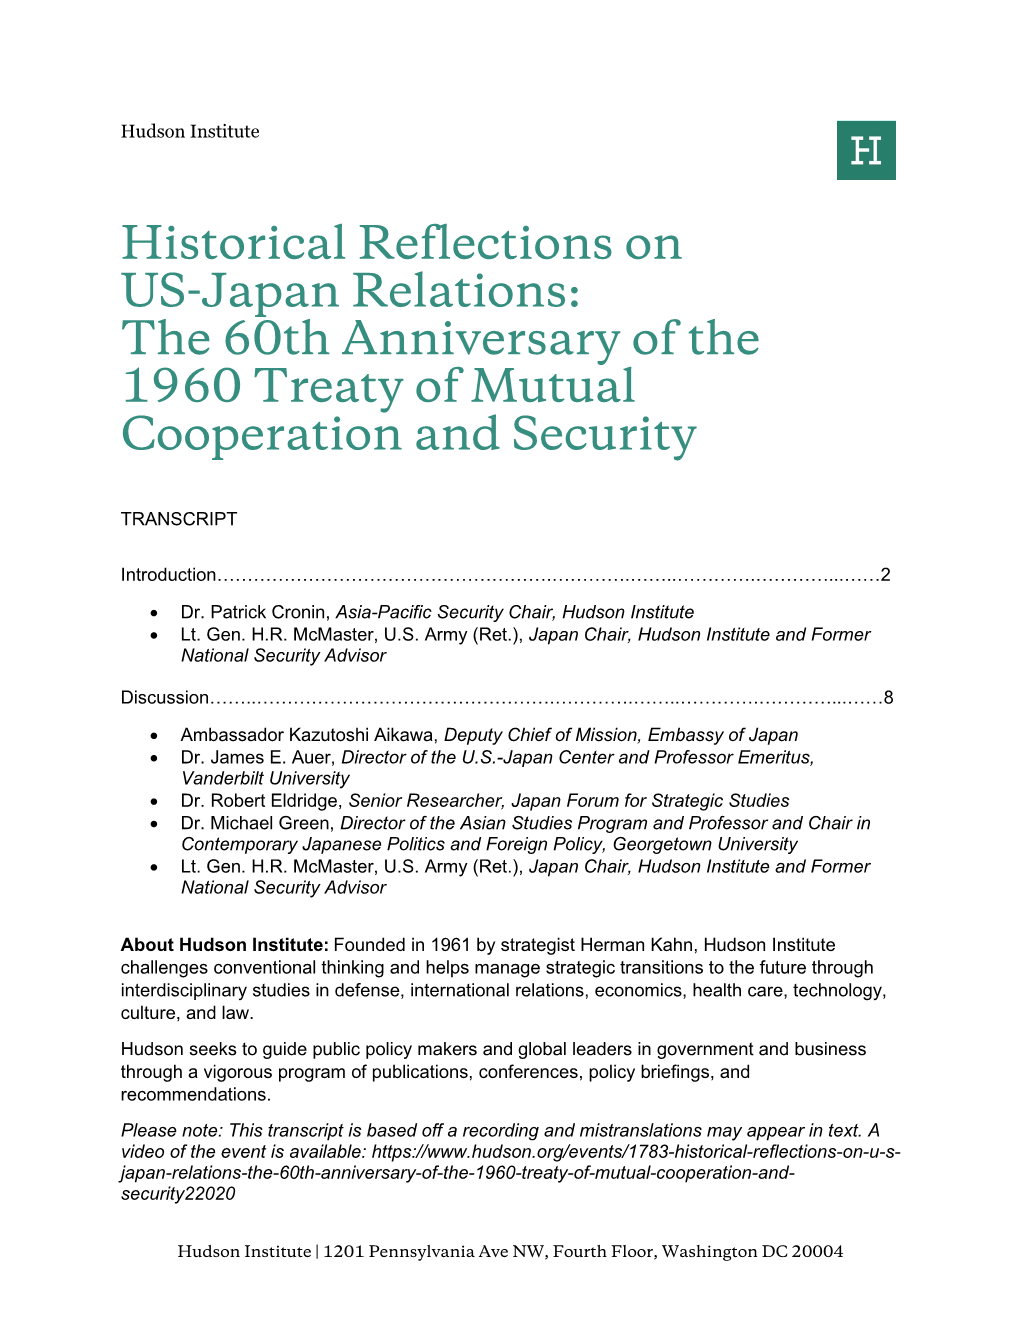 Historical Reflections on US-Japan Relations: the 60Th Anniversary of the 1960 Treaty of Mutual Cooperation and Security